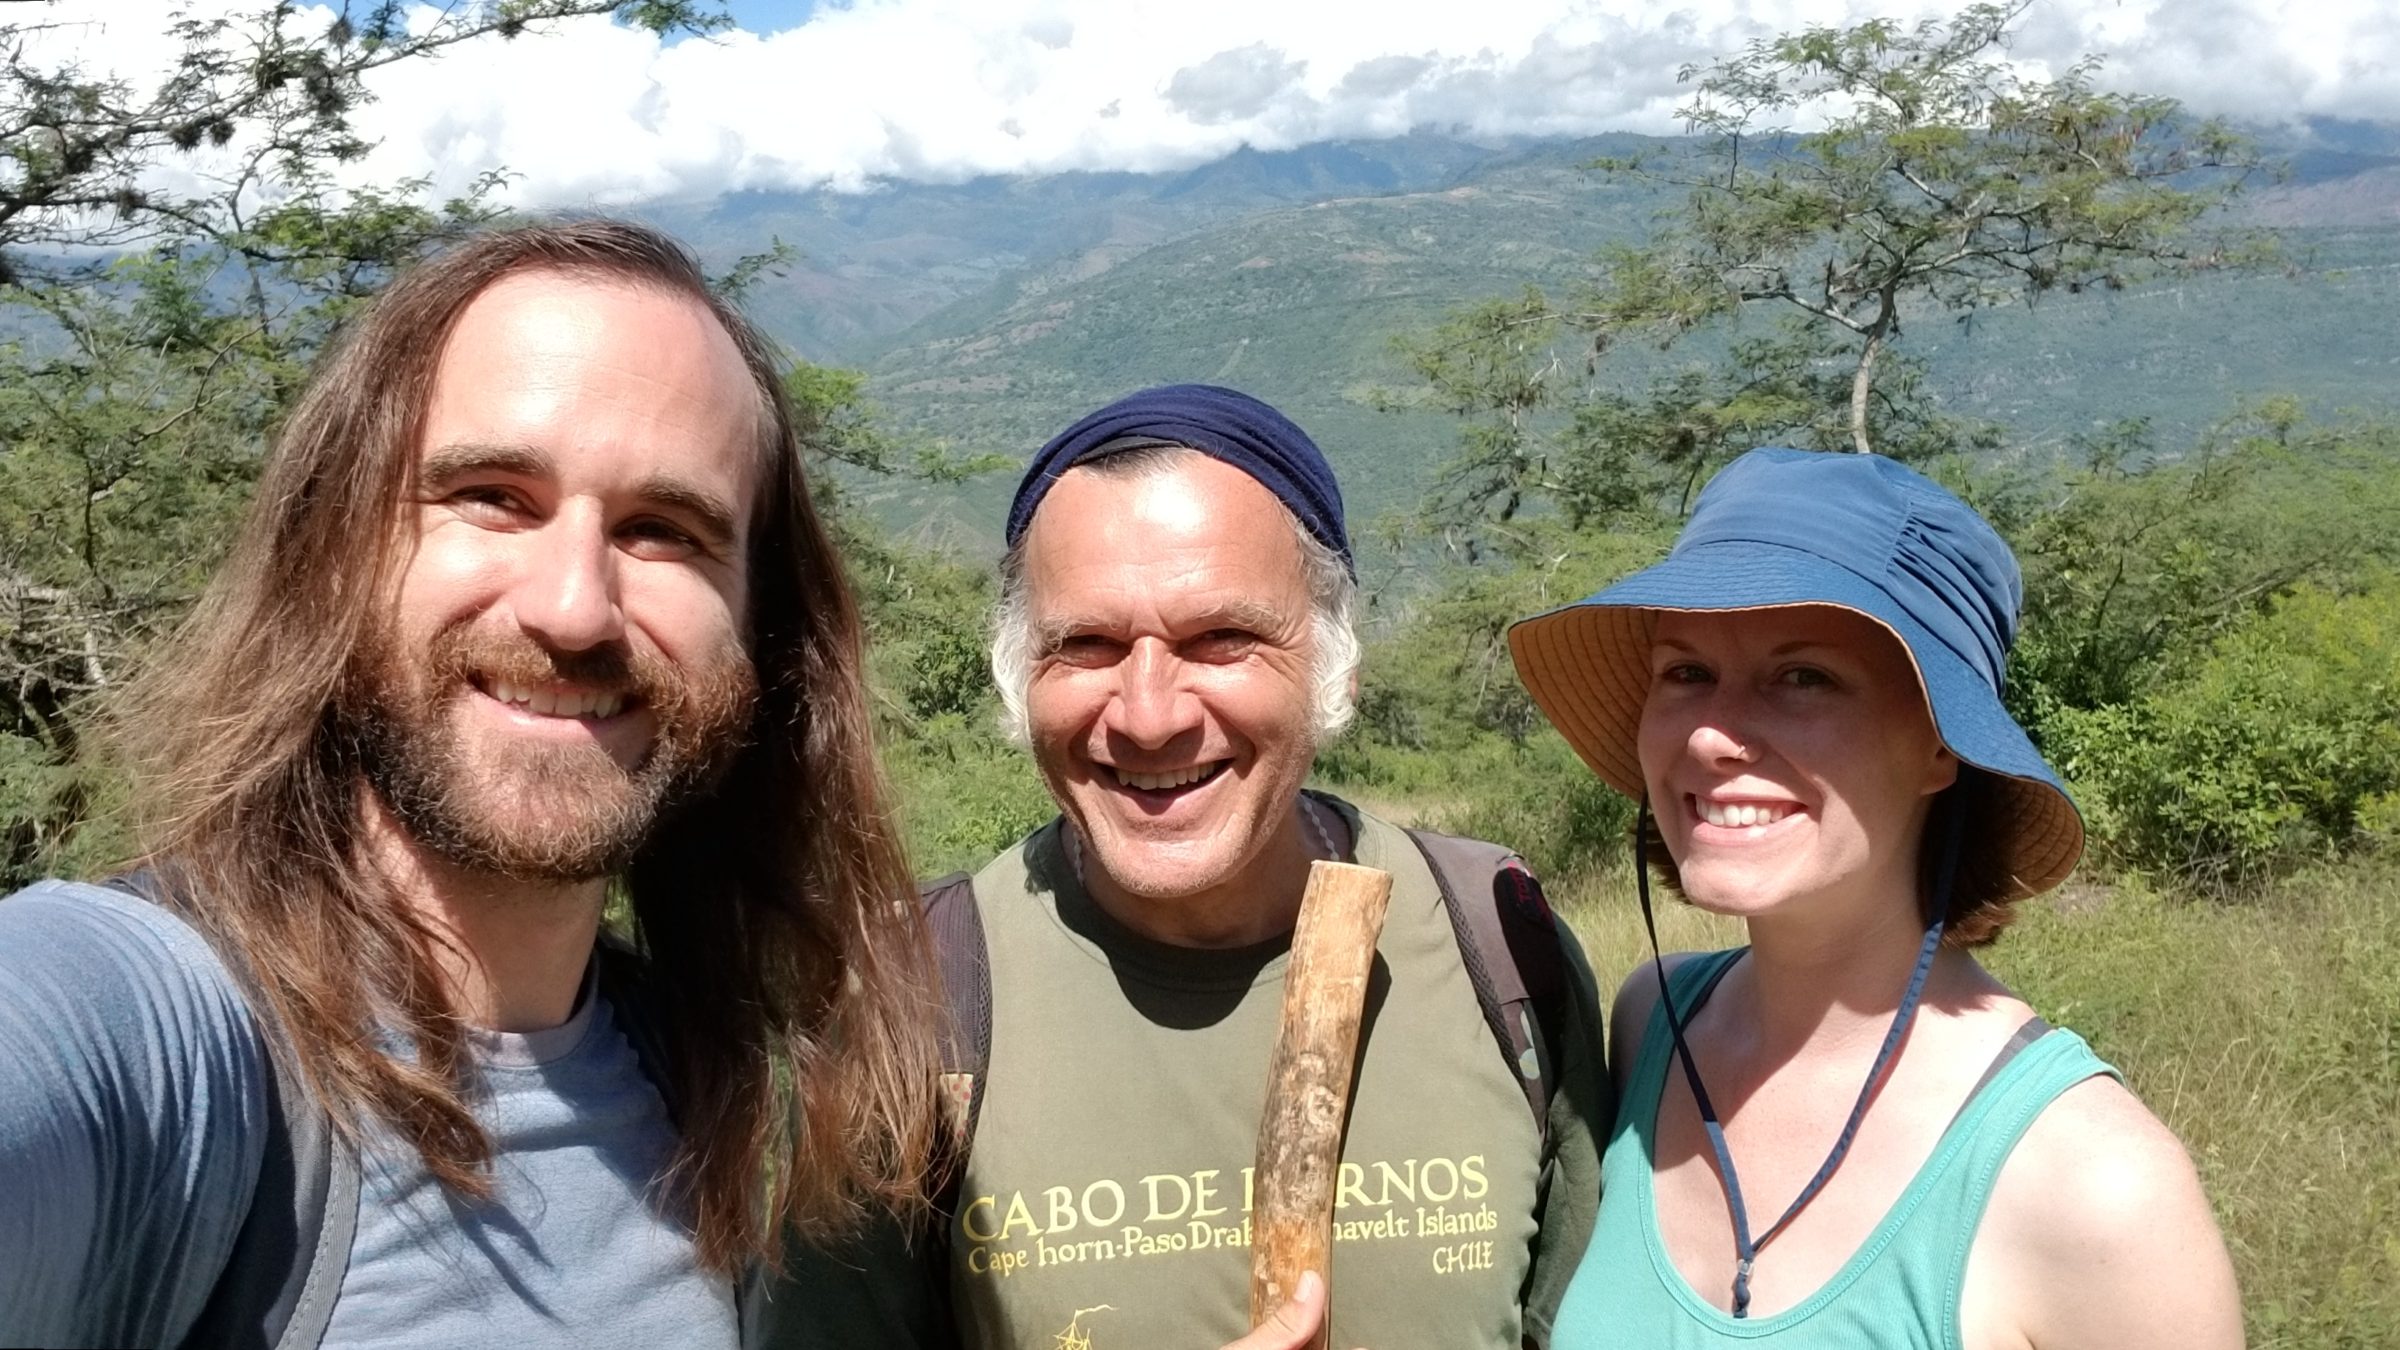 Exploring Guane with our friend Colombio